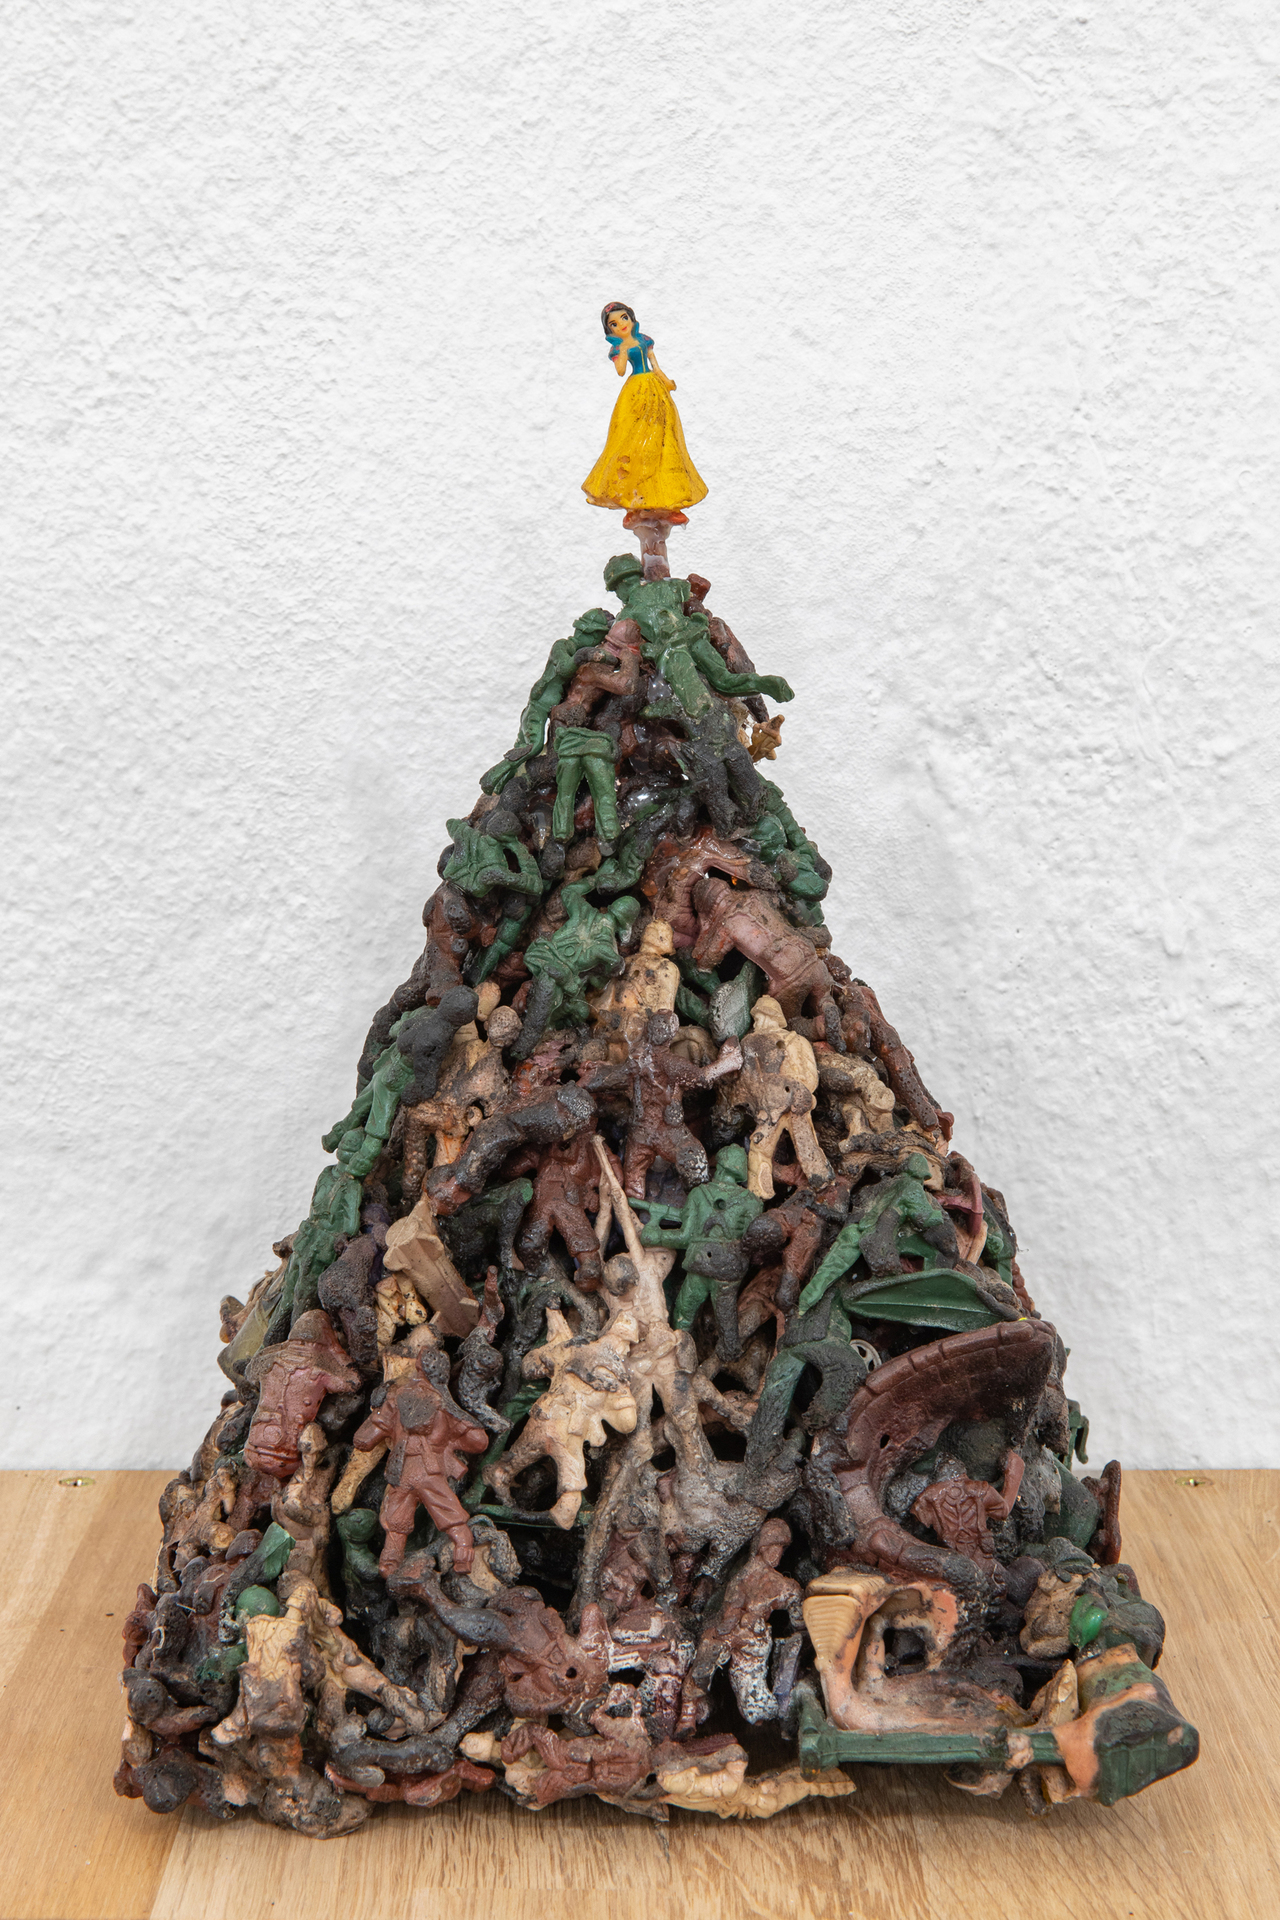 detail: Five Types of Soldiers, 2011, plastic figurines treated with cyanoacrylate and nitrogen enriched gasoline, 17 × 27 × 20 cm on top of handcrafted oak shelf, courtesy of the gallery